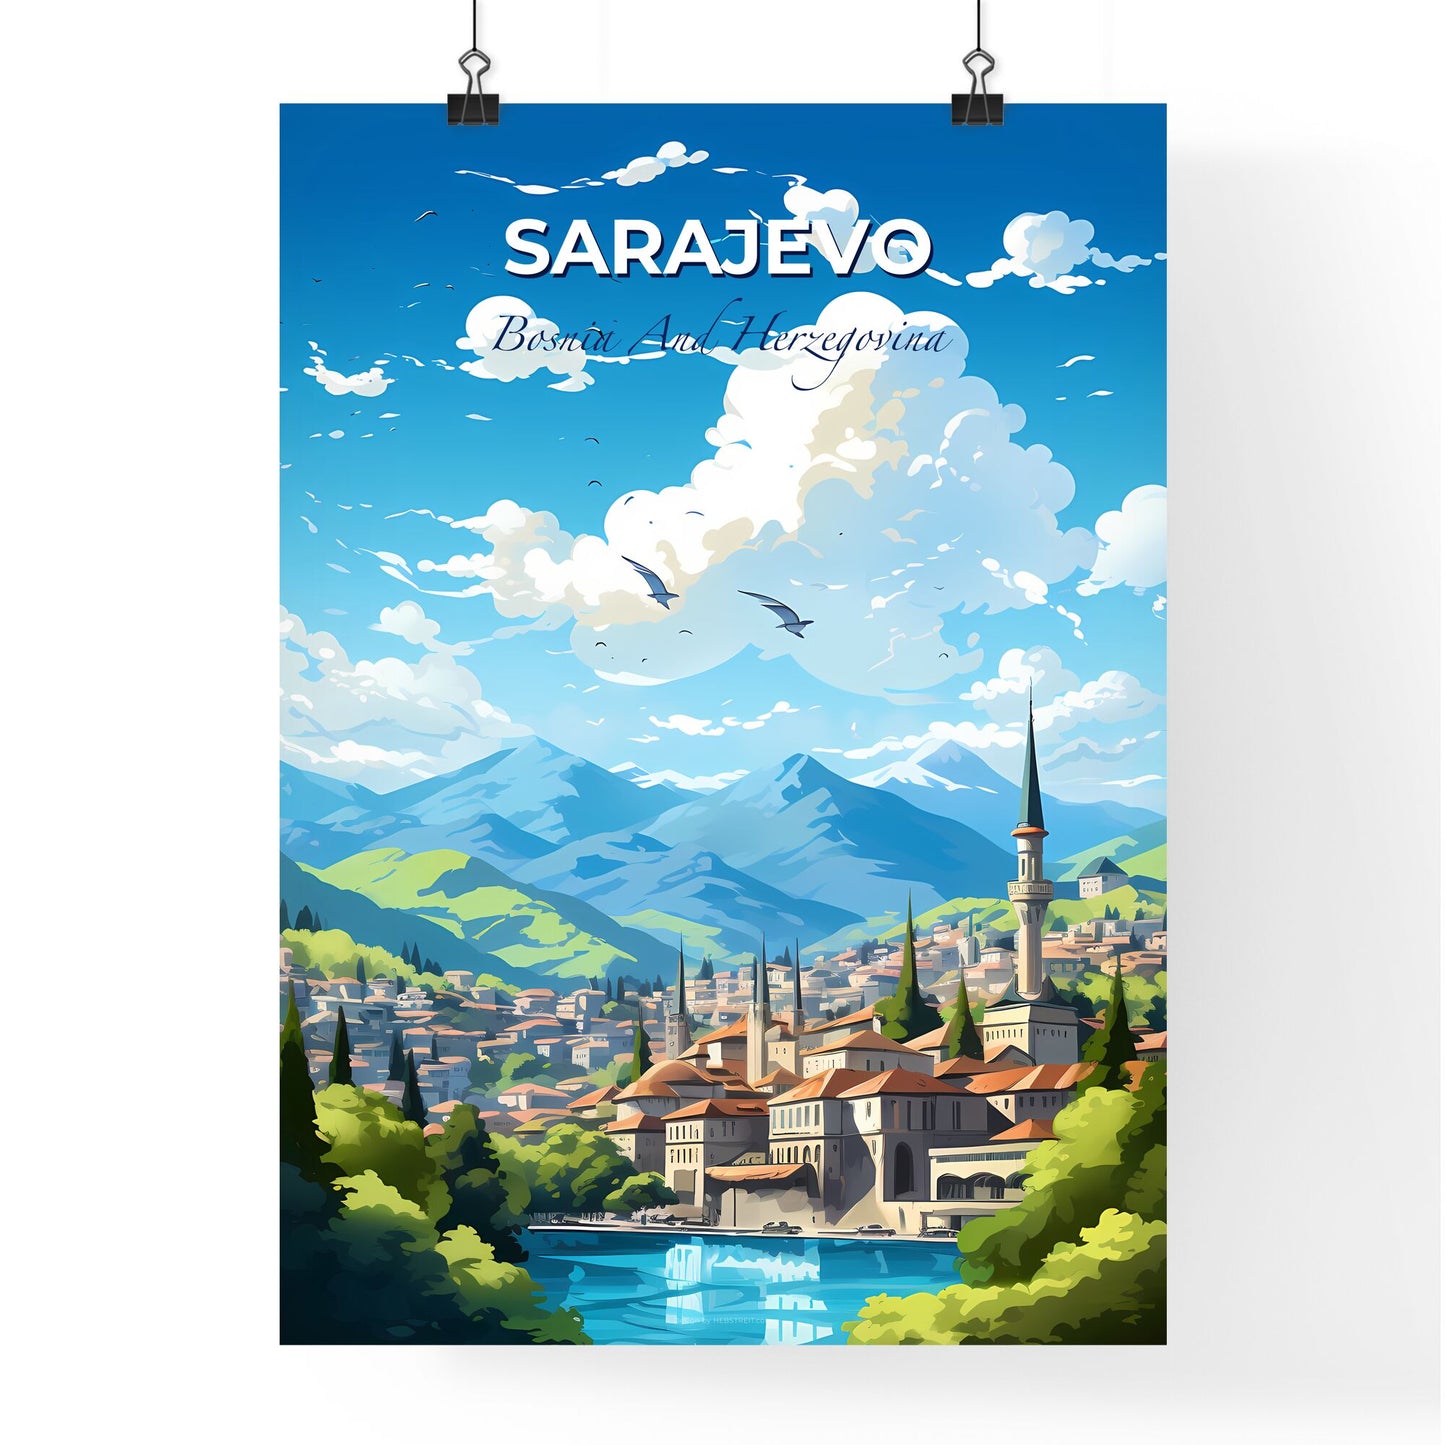 Sarajevo Bosnia And Herzegovina Skyline - A Landscape Of A Town With Trees And Mountains - Customizable Travel Gift Default Title